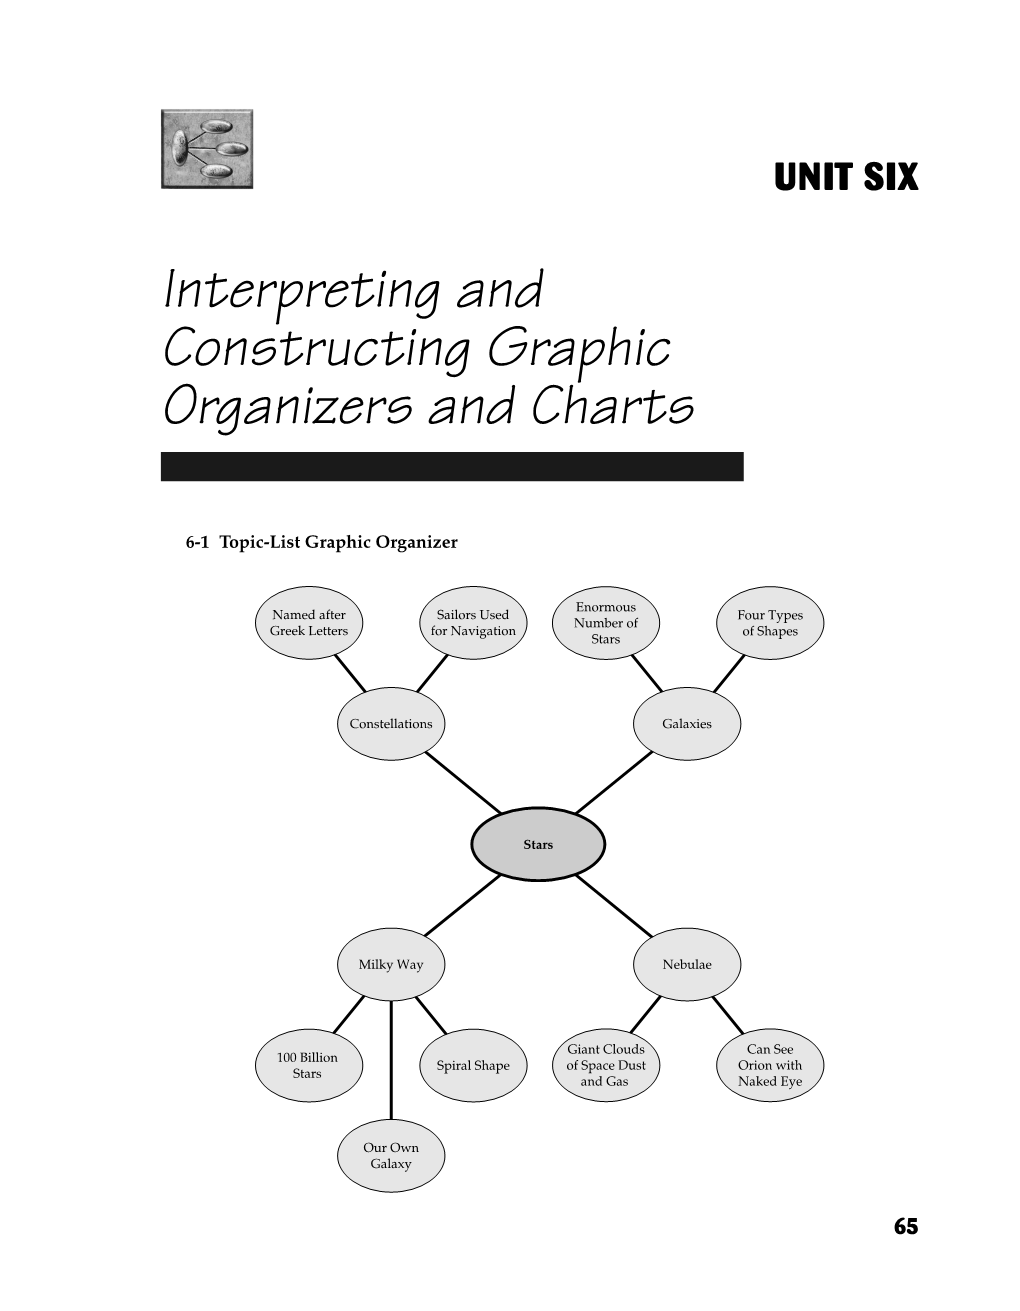 Interpreting and Constructing Graphic Organizers and Charts